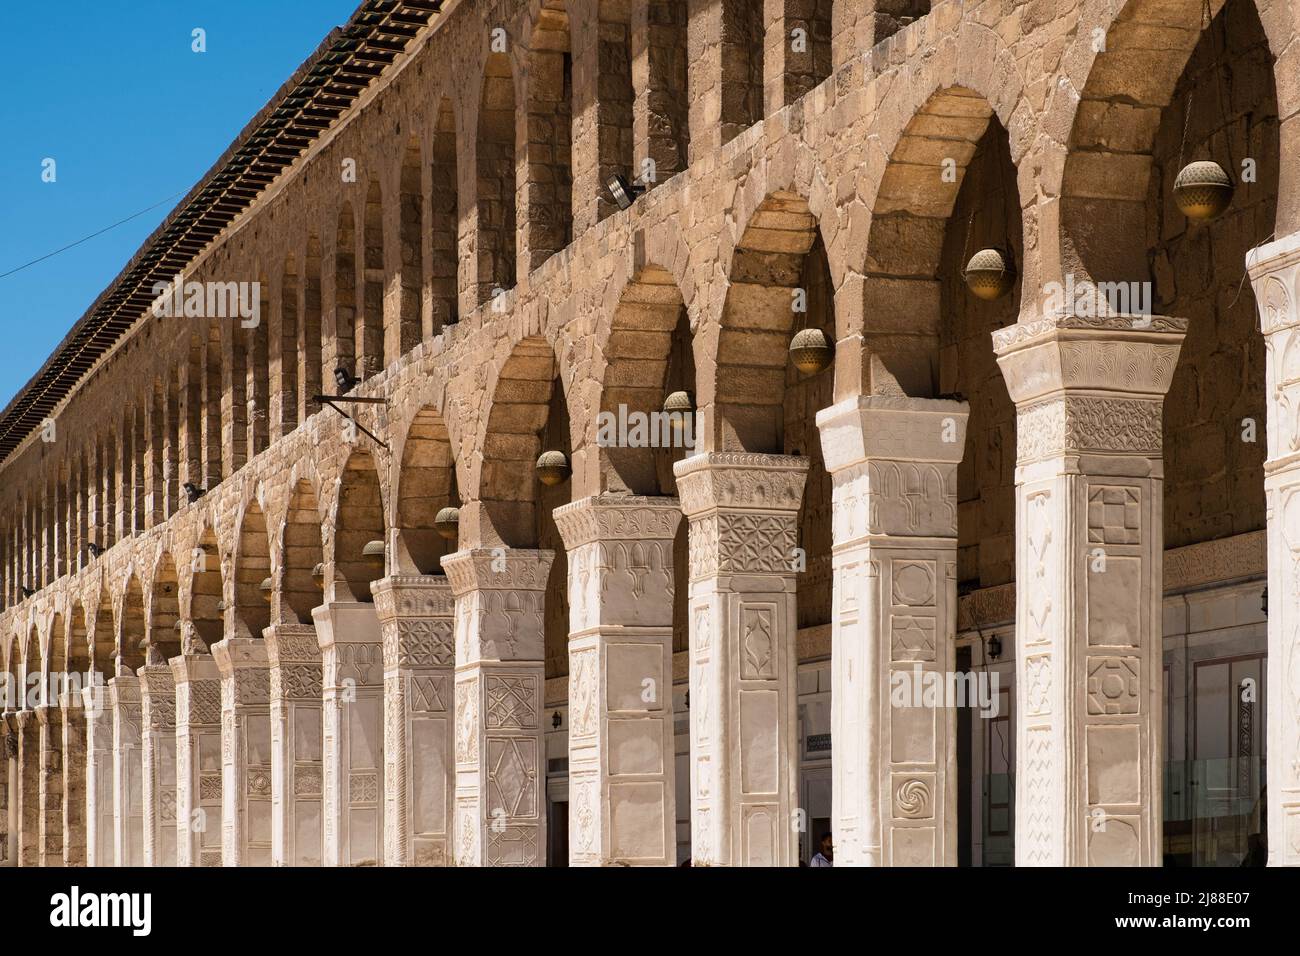 Damascus, Syria -May, 2022: Columns of the Umayyad Mosque, a.k.a. the Great Mosque of Damascus Stock Photo